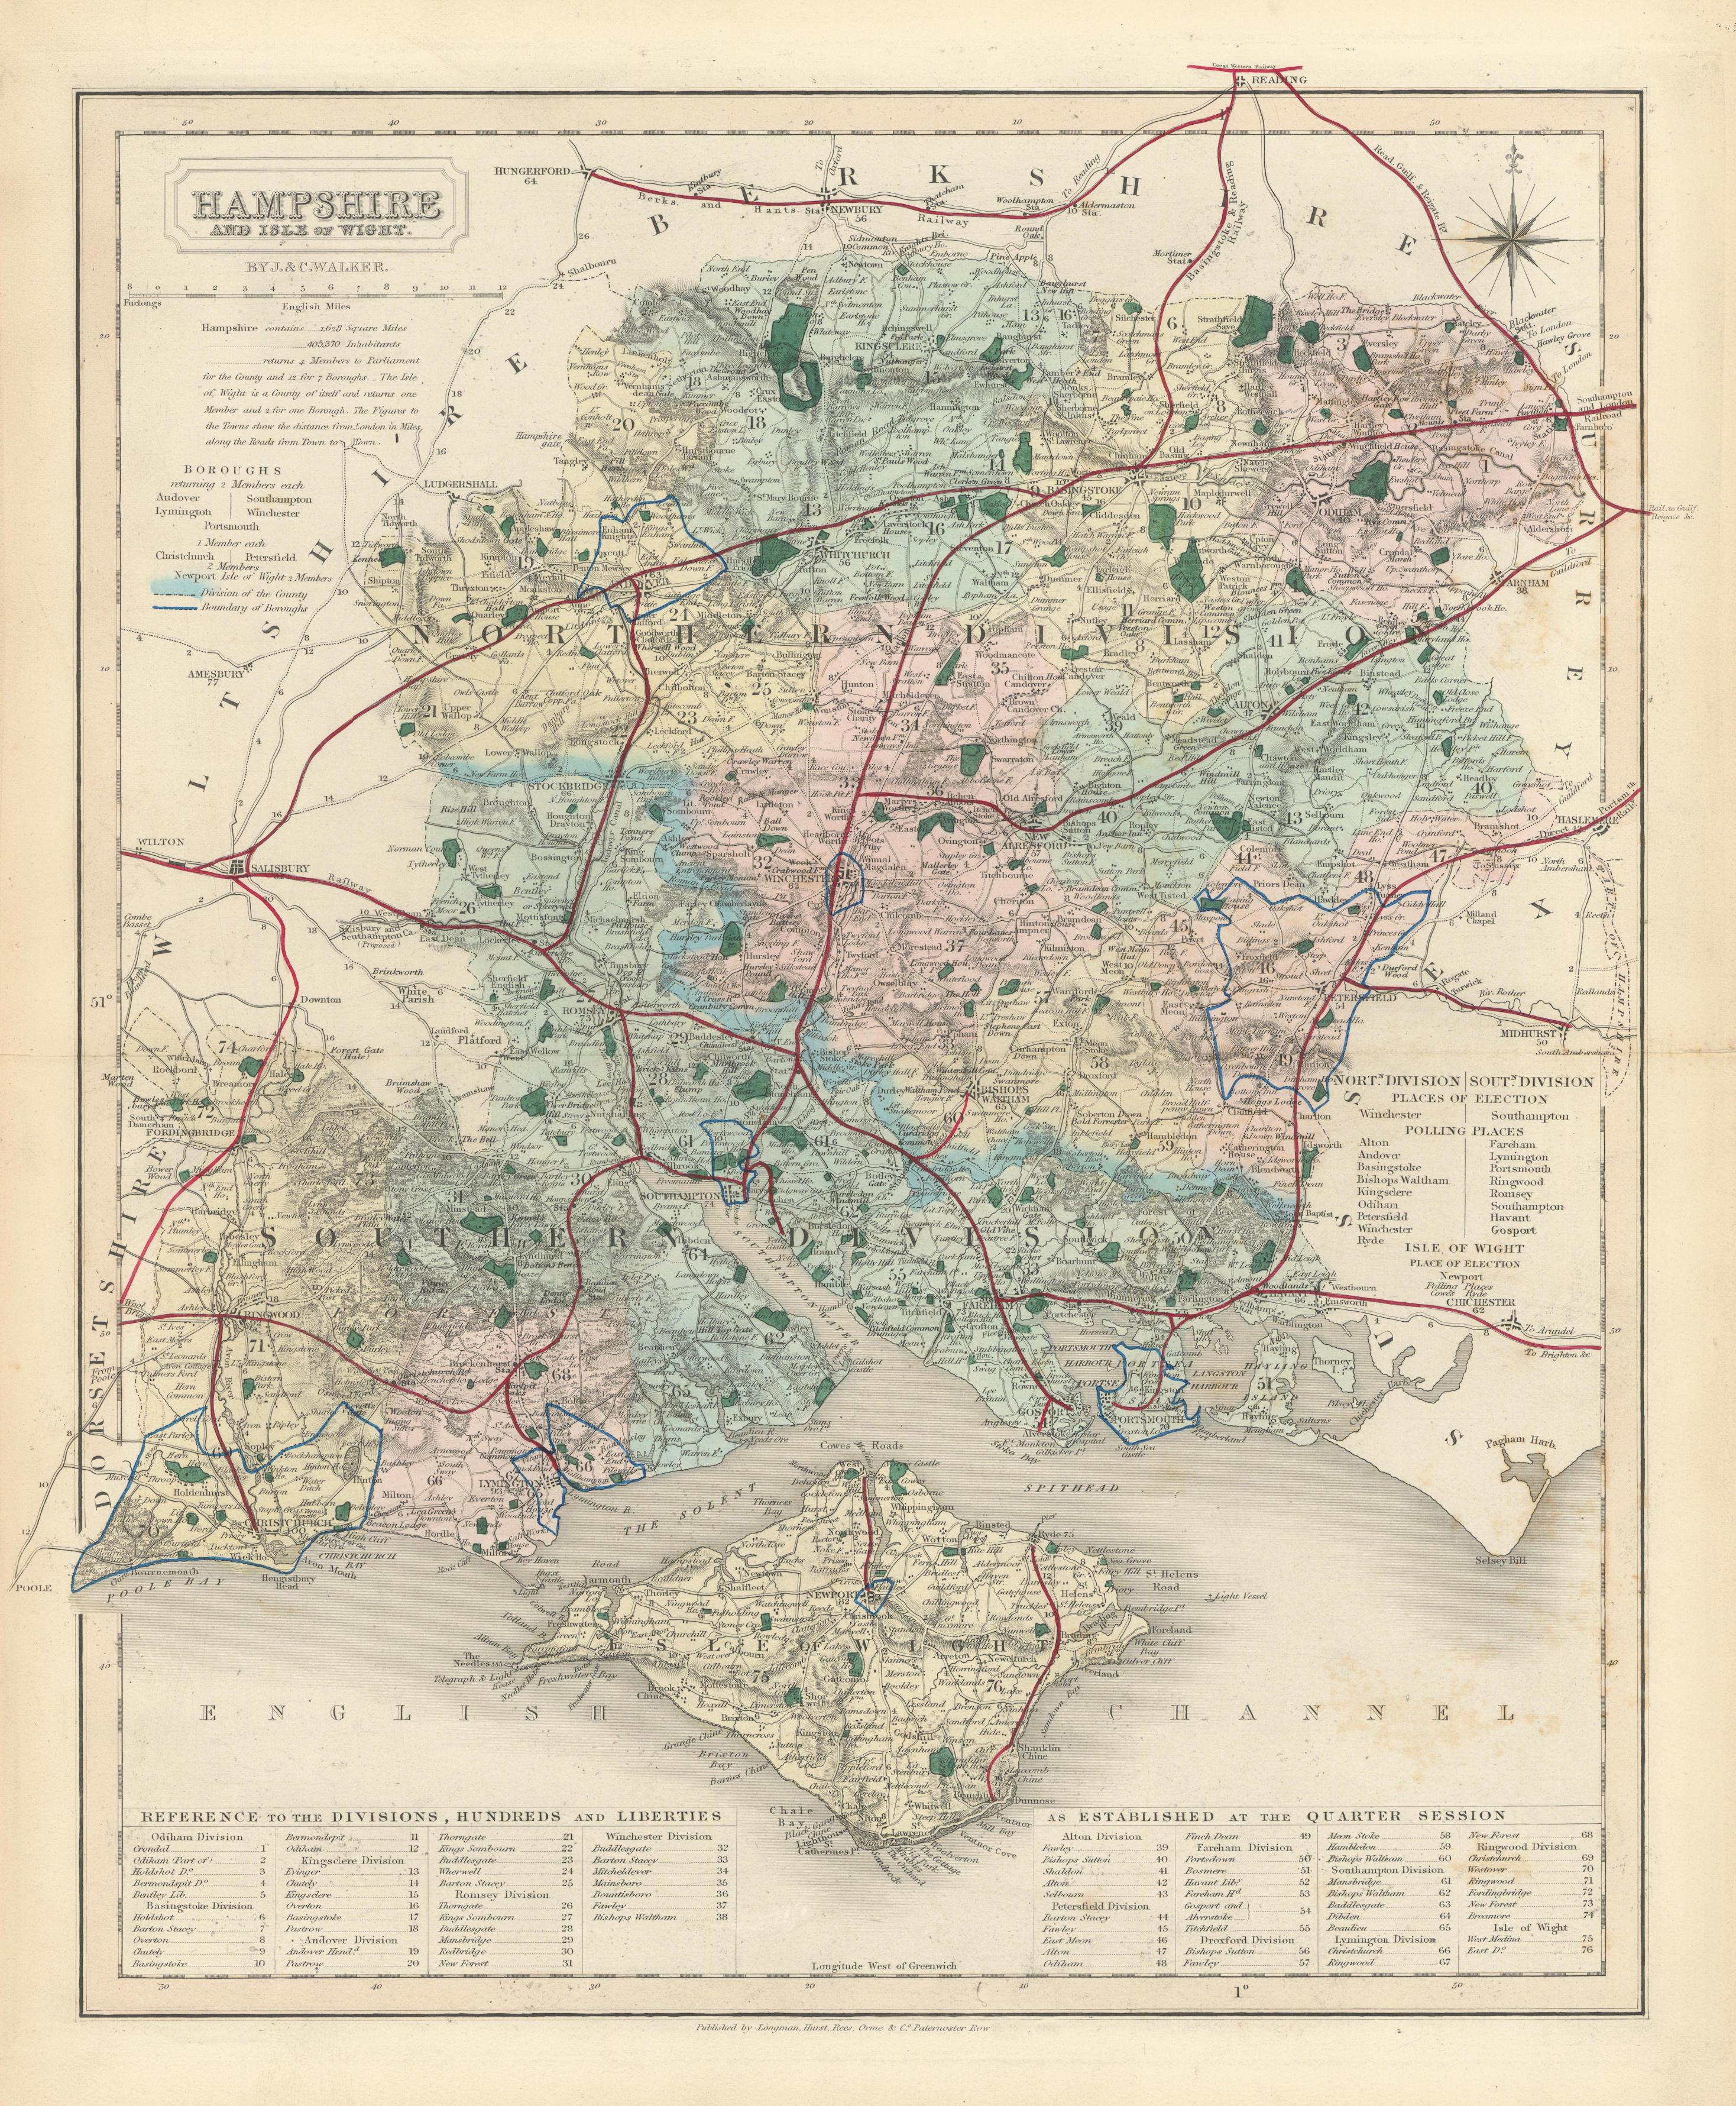 Associate Product Hampshire antique county map by J & C Walker. Railways & boroughs 1870 old